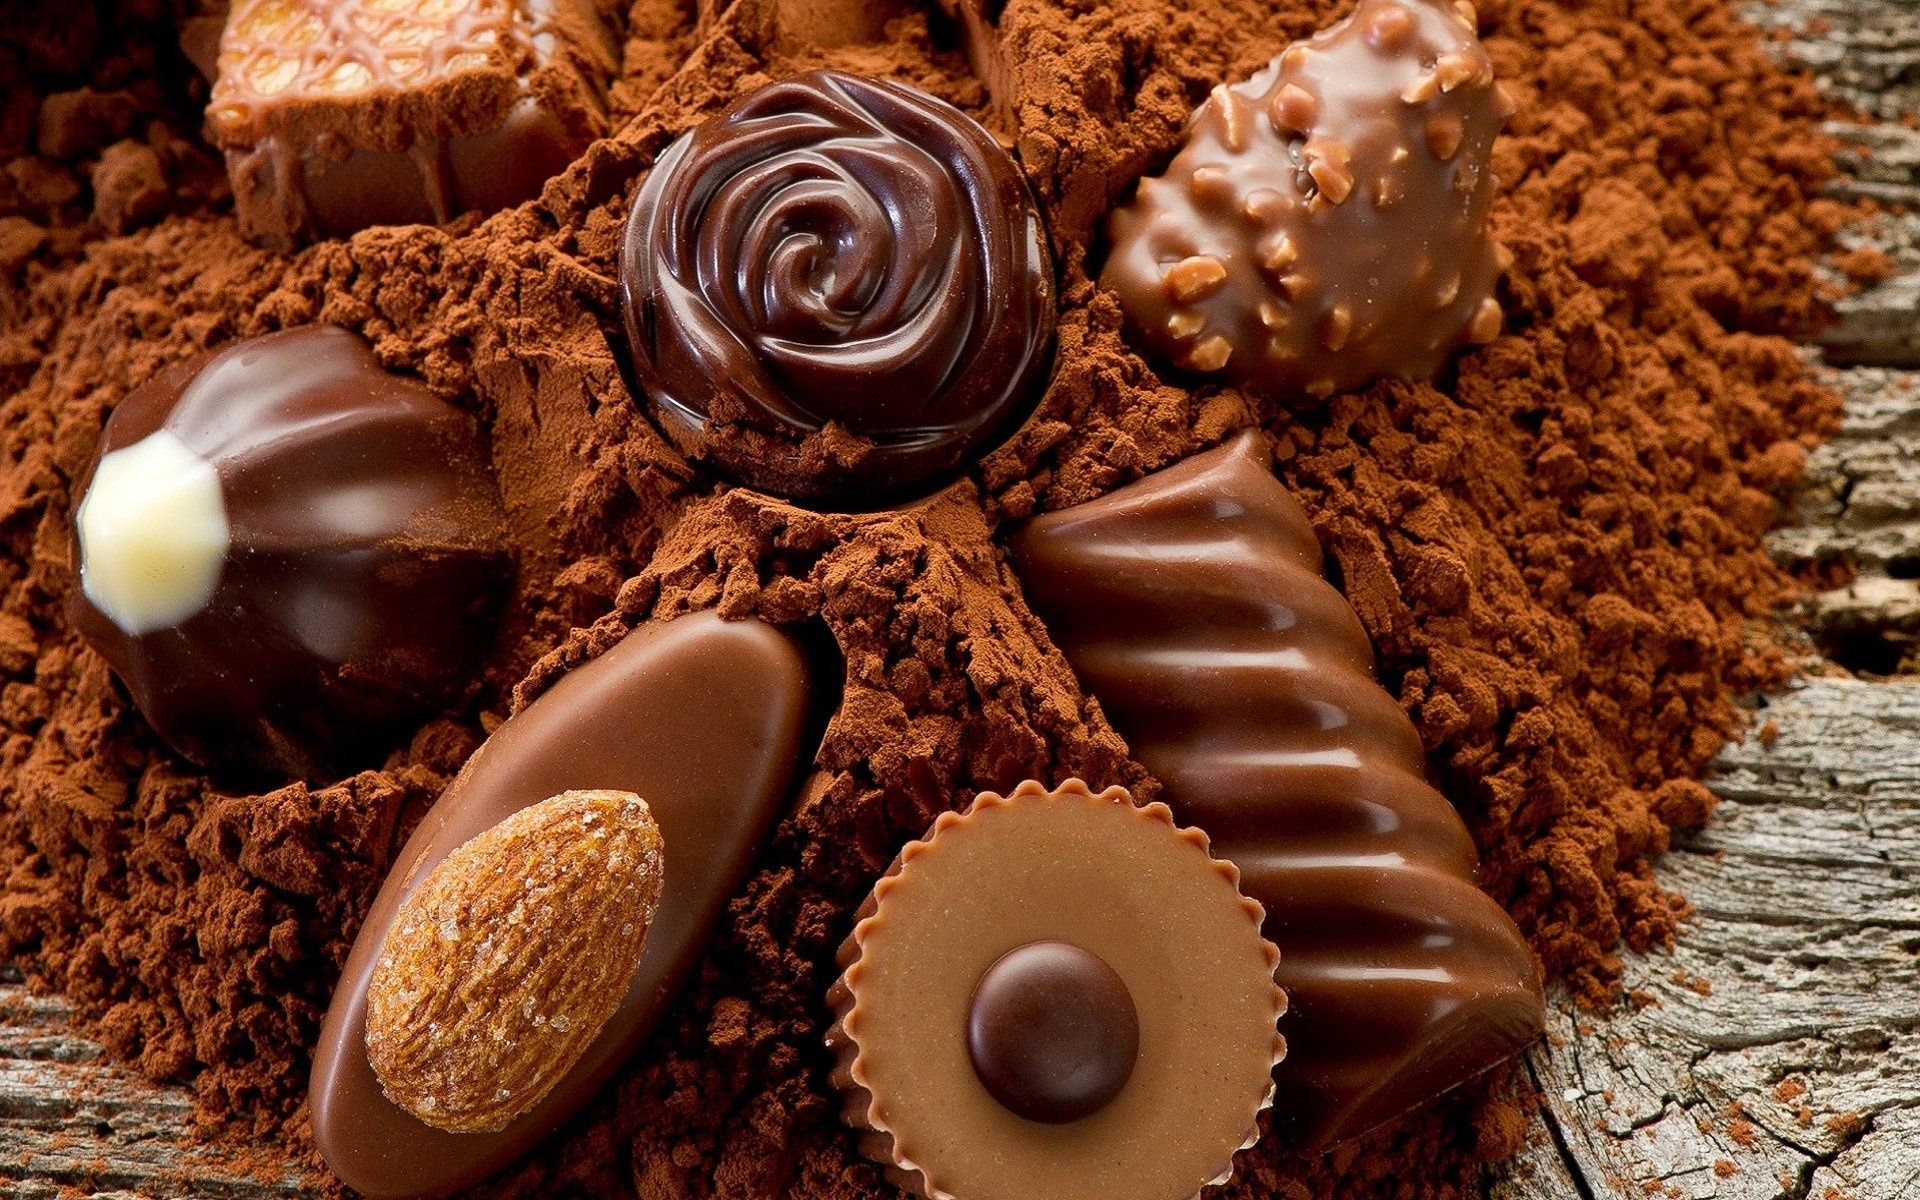 Chocolate HD wallpaper, Background imagery, Rich chocolate indulgence, Tempting delight, 1920x1200 HD Desktop